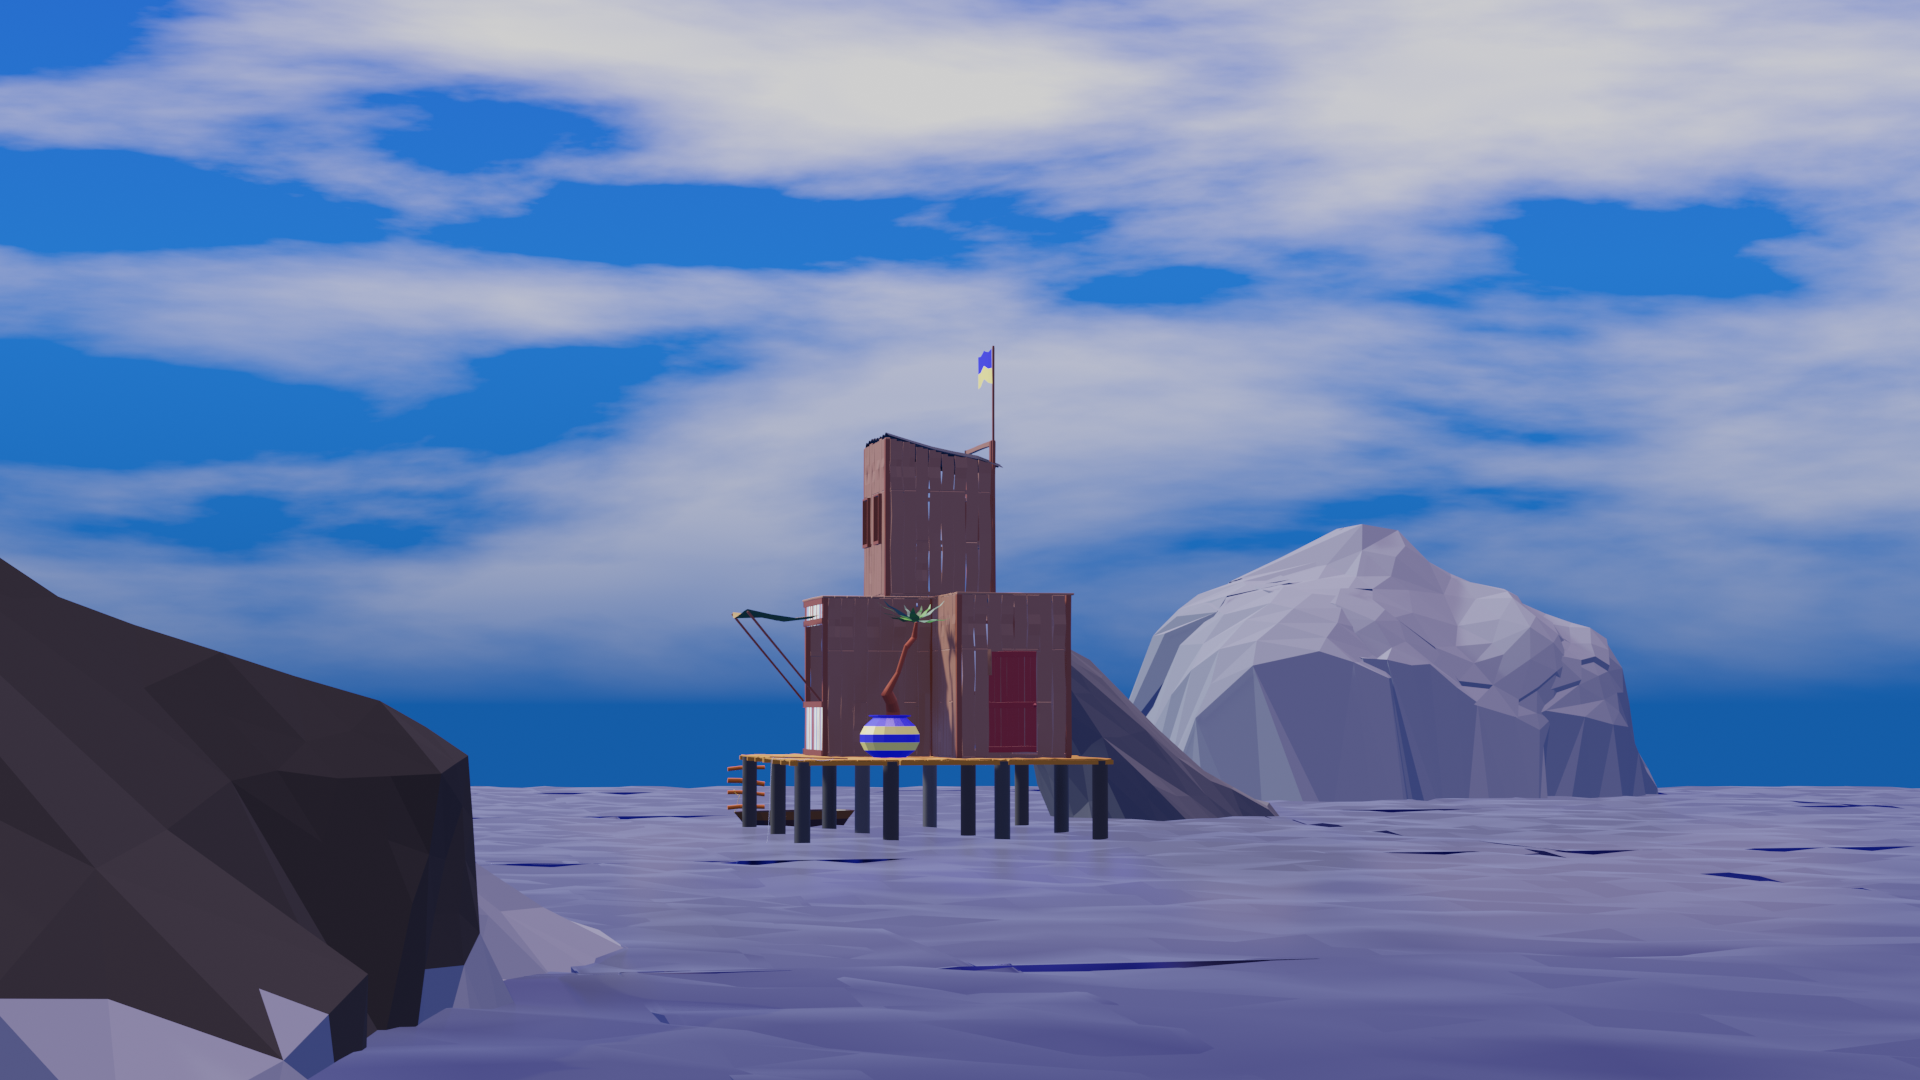 I wanted to do this course because I was intimated by modeling low-poly water.